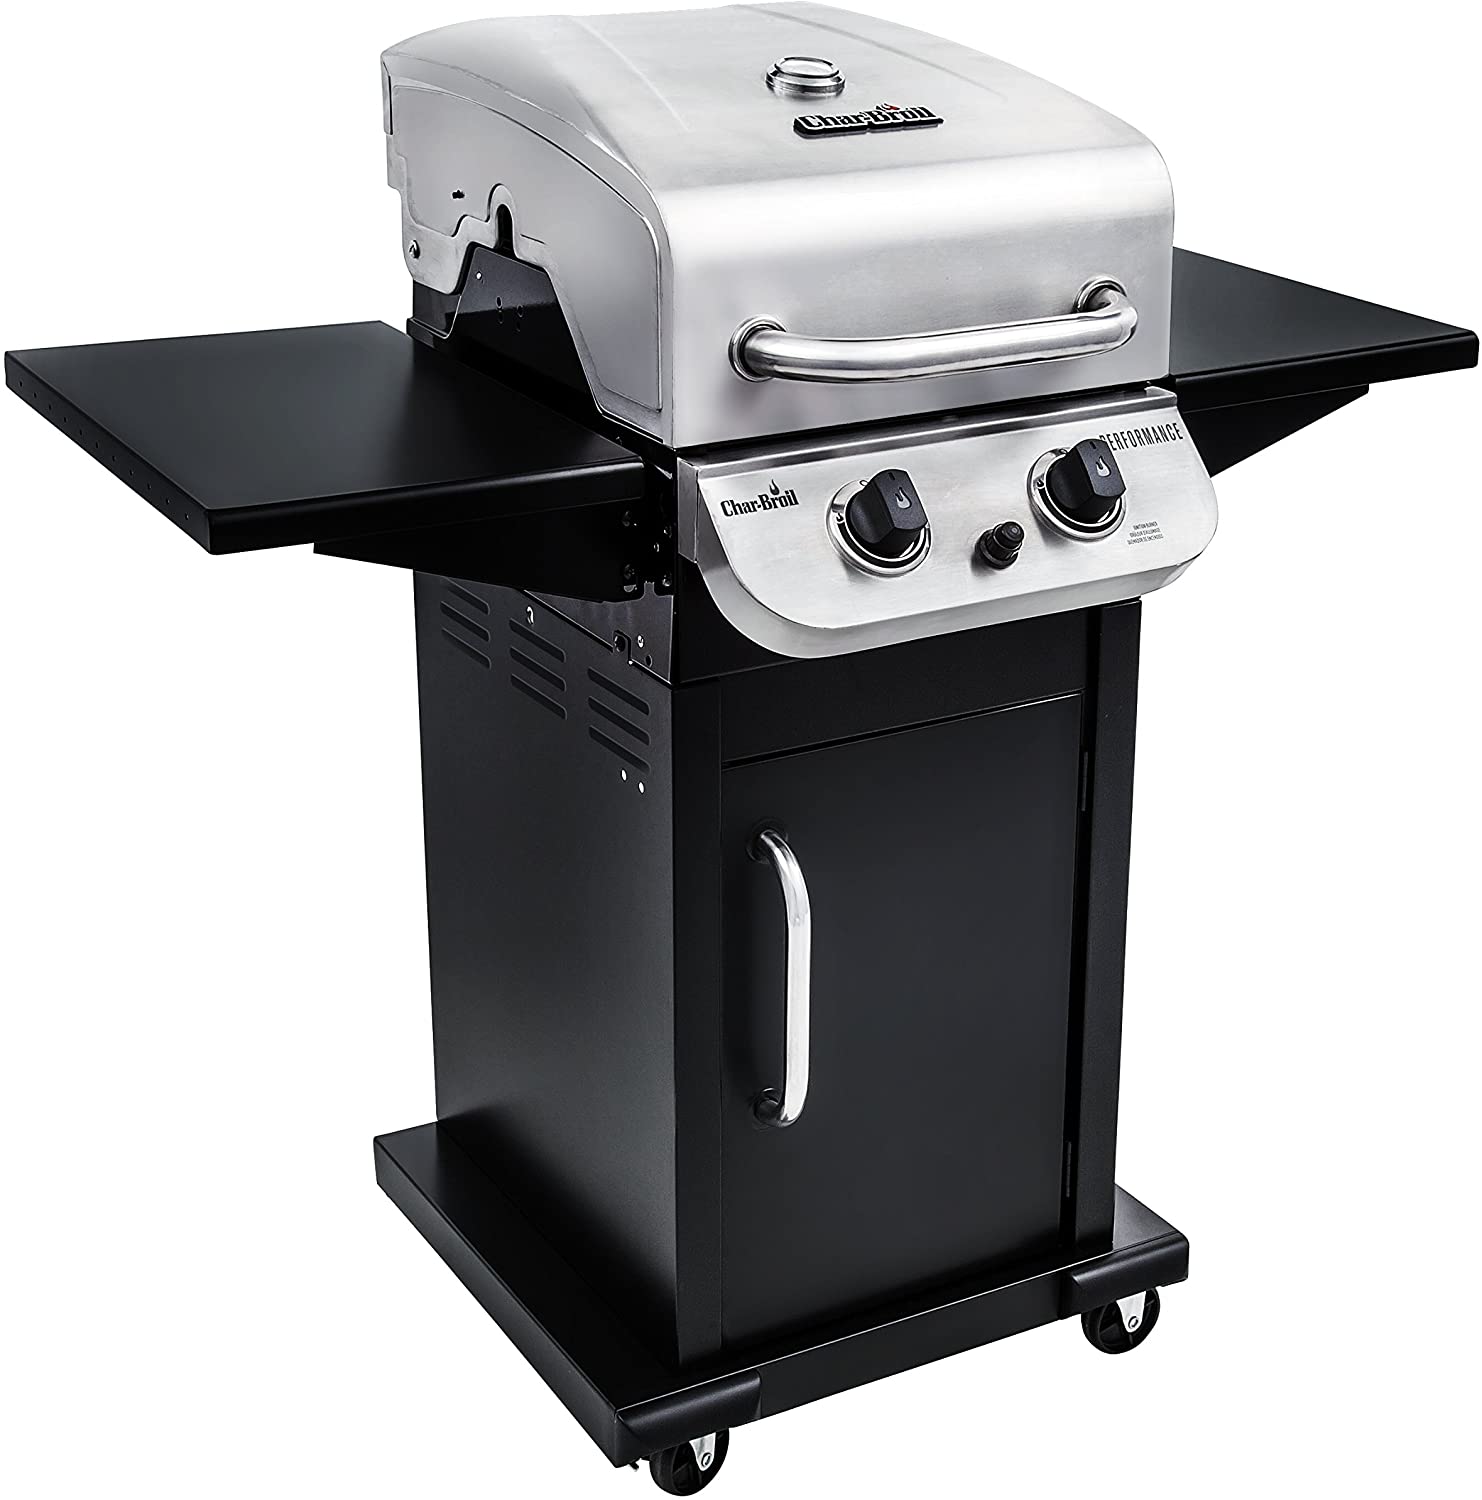 Char-Broil 463673519 Performance Series